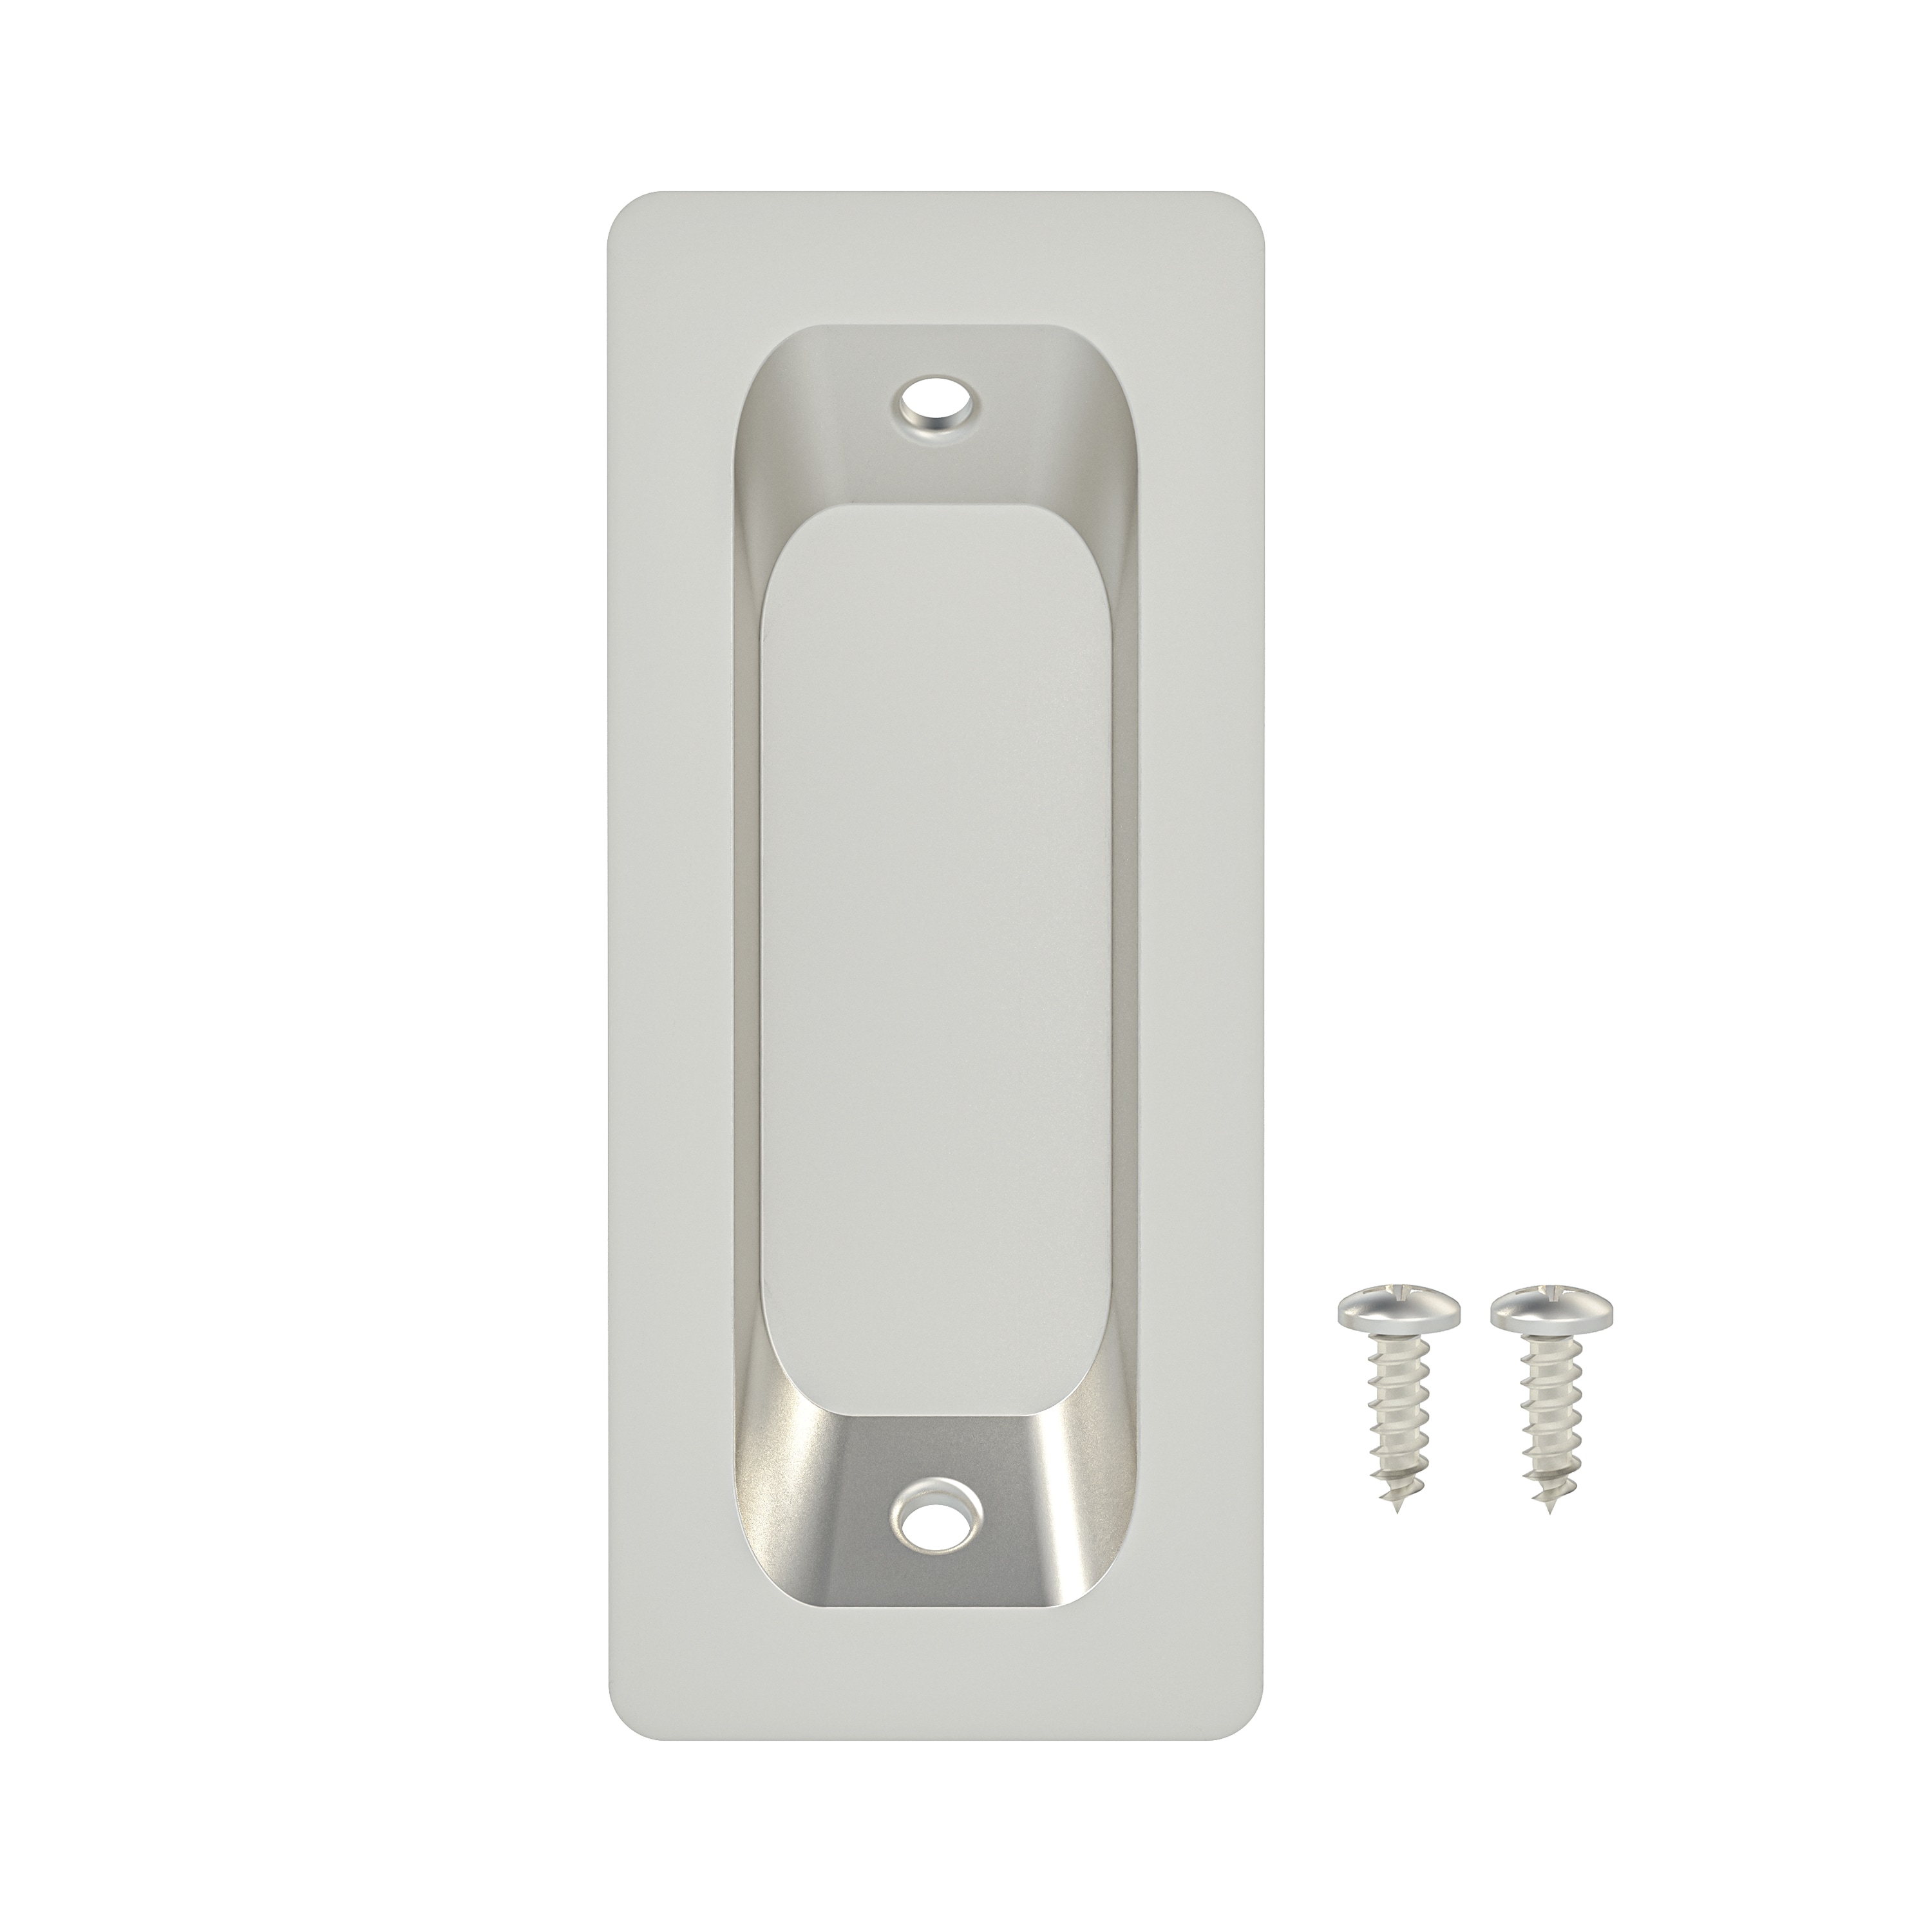 Cold Store Storage Freezer Door Handle Oven Hinge Knob Lock Cam-lift Safety  Latch Hardware Pull Part Industrial Plant